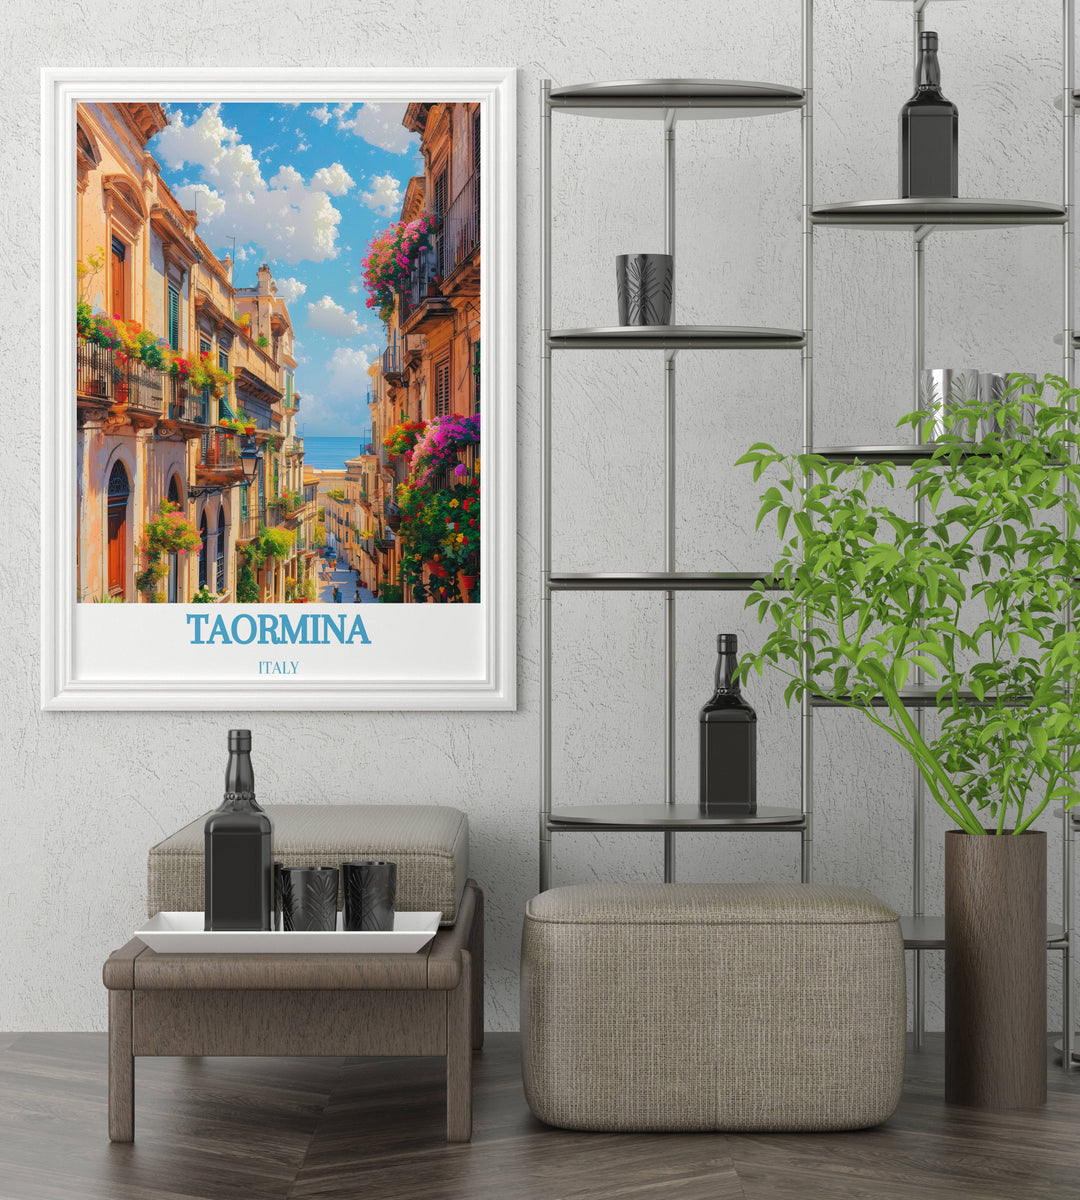 Personalized Corso Umberto custom print allowing you to add a special message or date, making it a unique and thoughtful gift that brings the beauty of Taormina into your home.